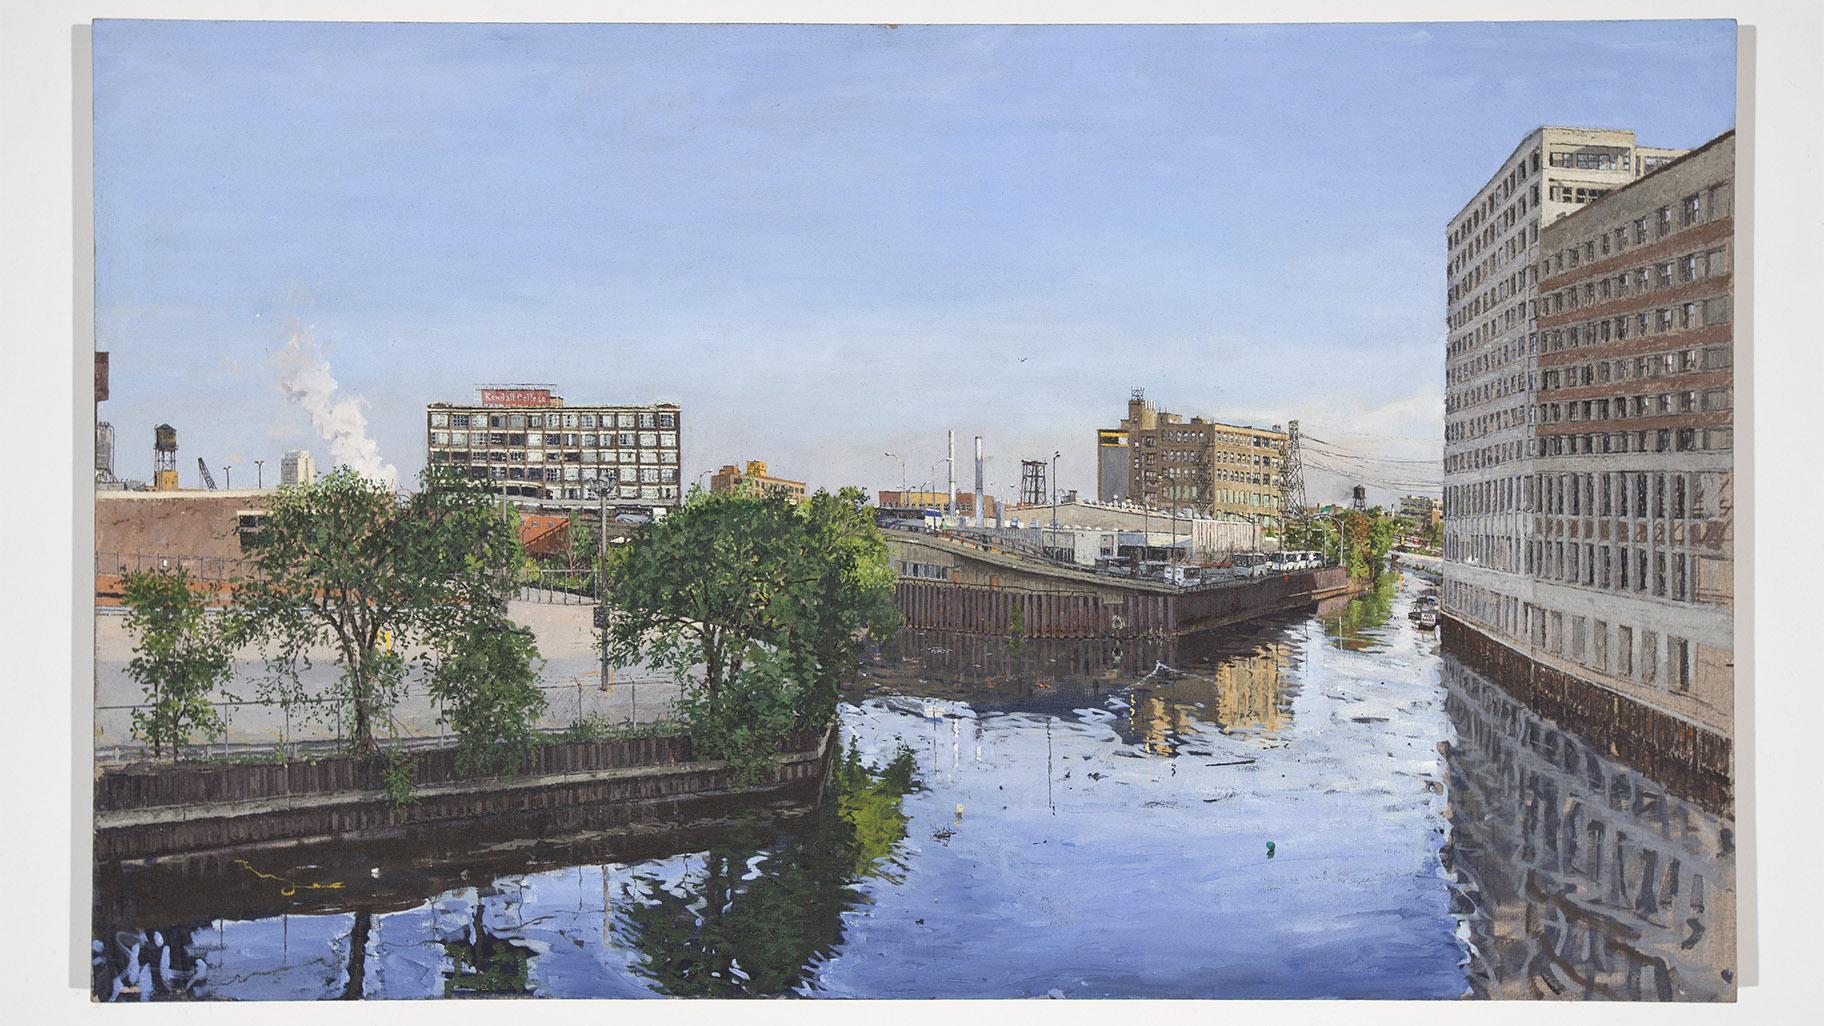 A painting of a fork in the Chicago river by Andy Paczos. (Photo by Dimitre Photography, Chicago)